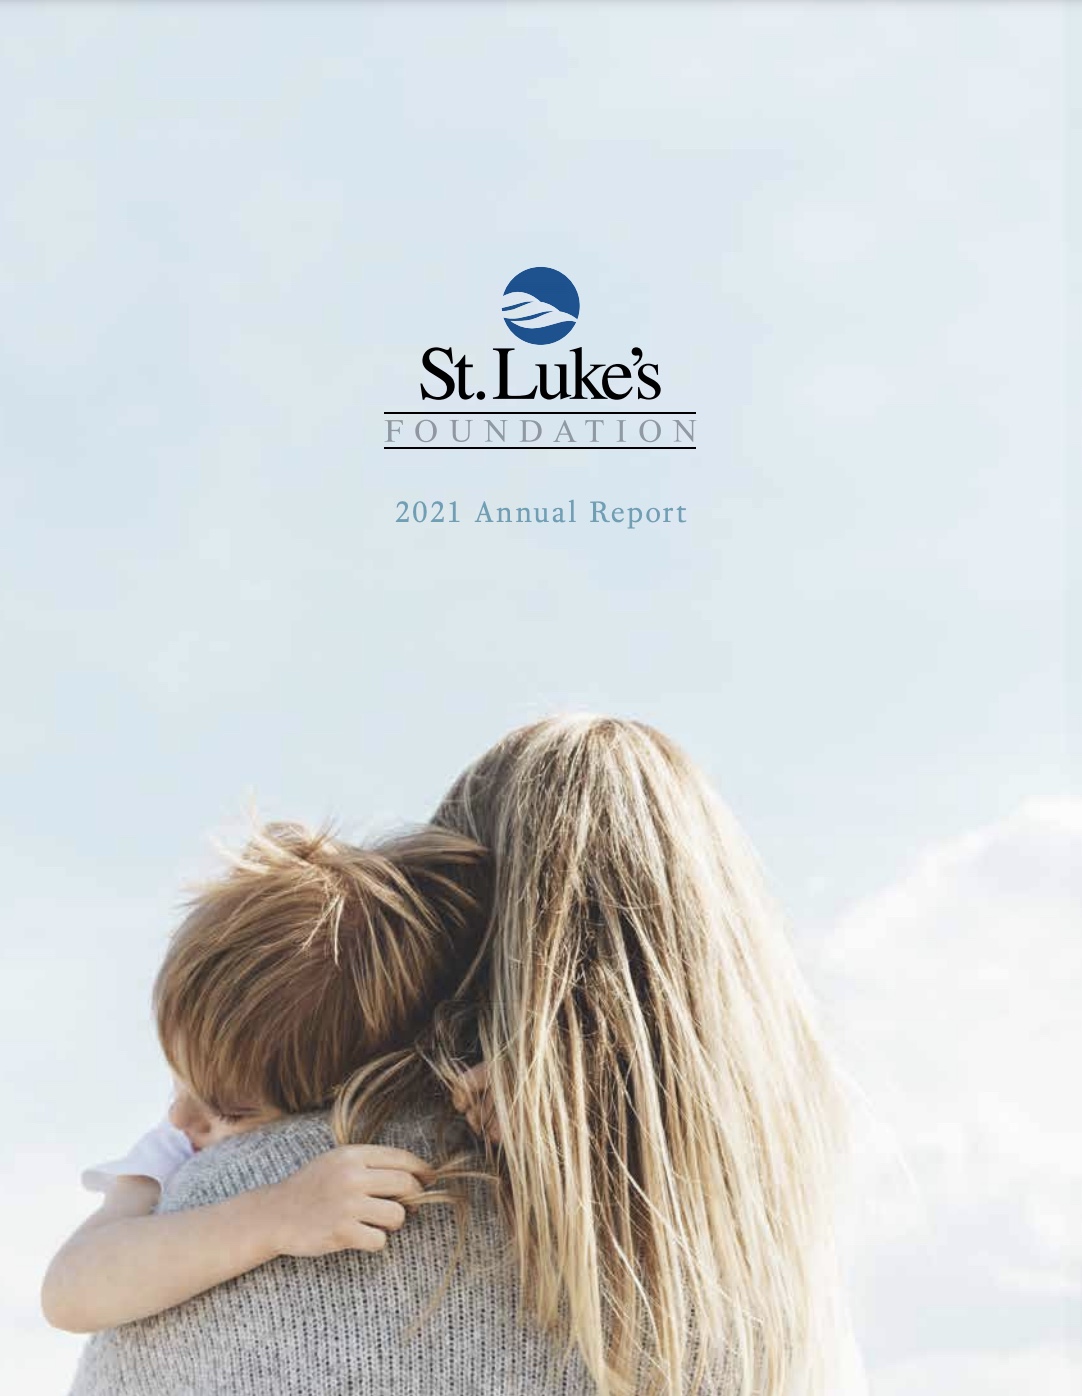 /documents/foundation-reports/2021-Foundation-Annual-Report.pdf